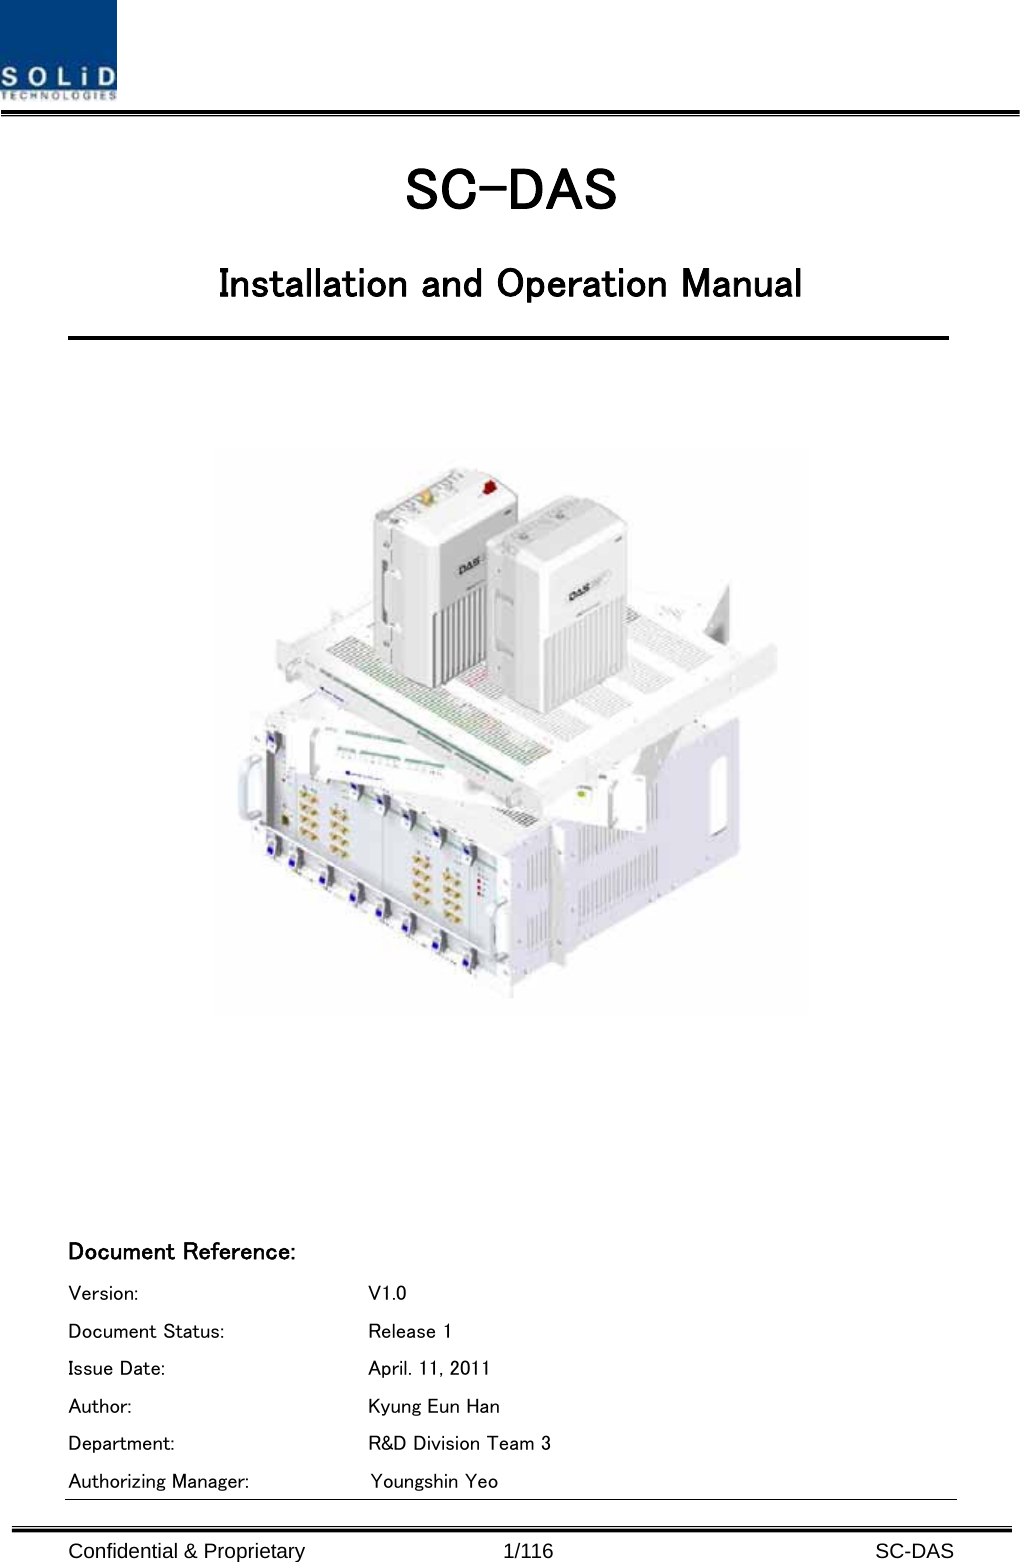  Confidential &amp; Proprietary                   1/116   SC-DAS SC-DAS Installation and Operation Manual        Document Reference:     Version:  V1.0 Document Status:  Release 1 Issue Date:  April. 11, 2011 Author:  Kyung Eun Han Department:  R&amp;D Division Team 3     Authorizing Manager:       Youngshin Yeo 